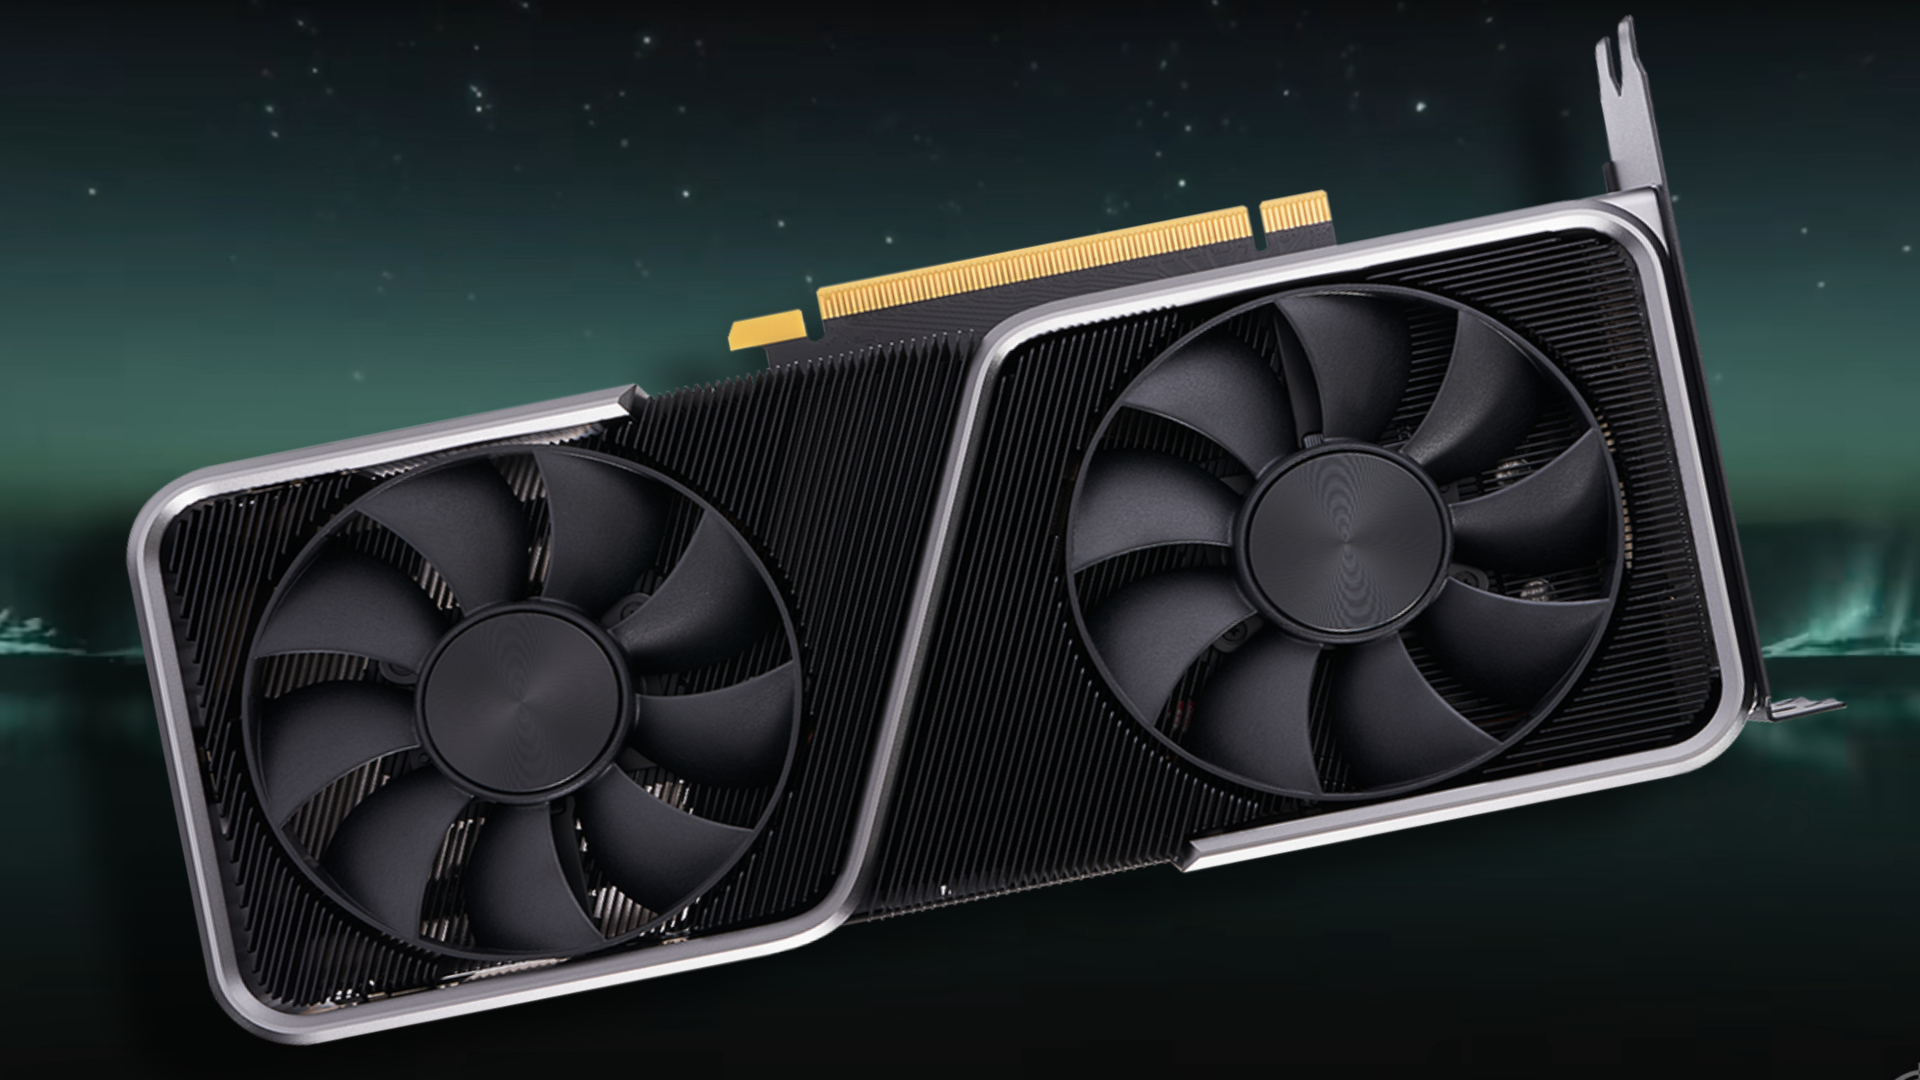 Nvidia RTX 4070 – release date, price, specs, and benchmark rumours